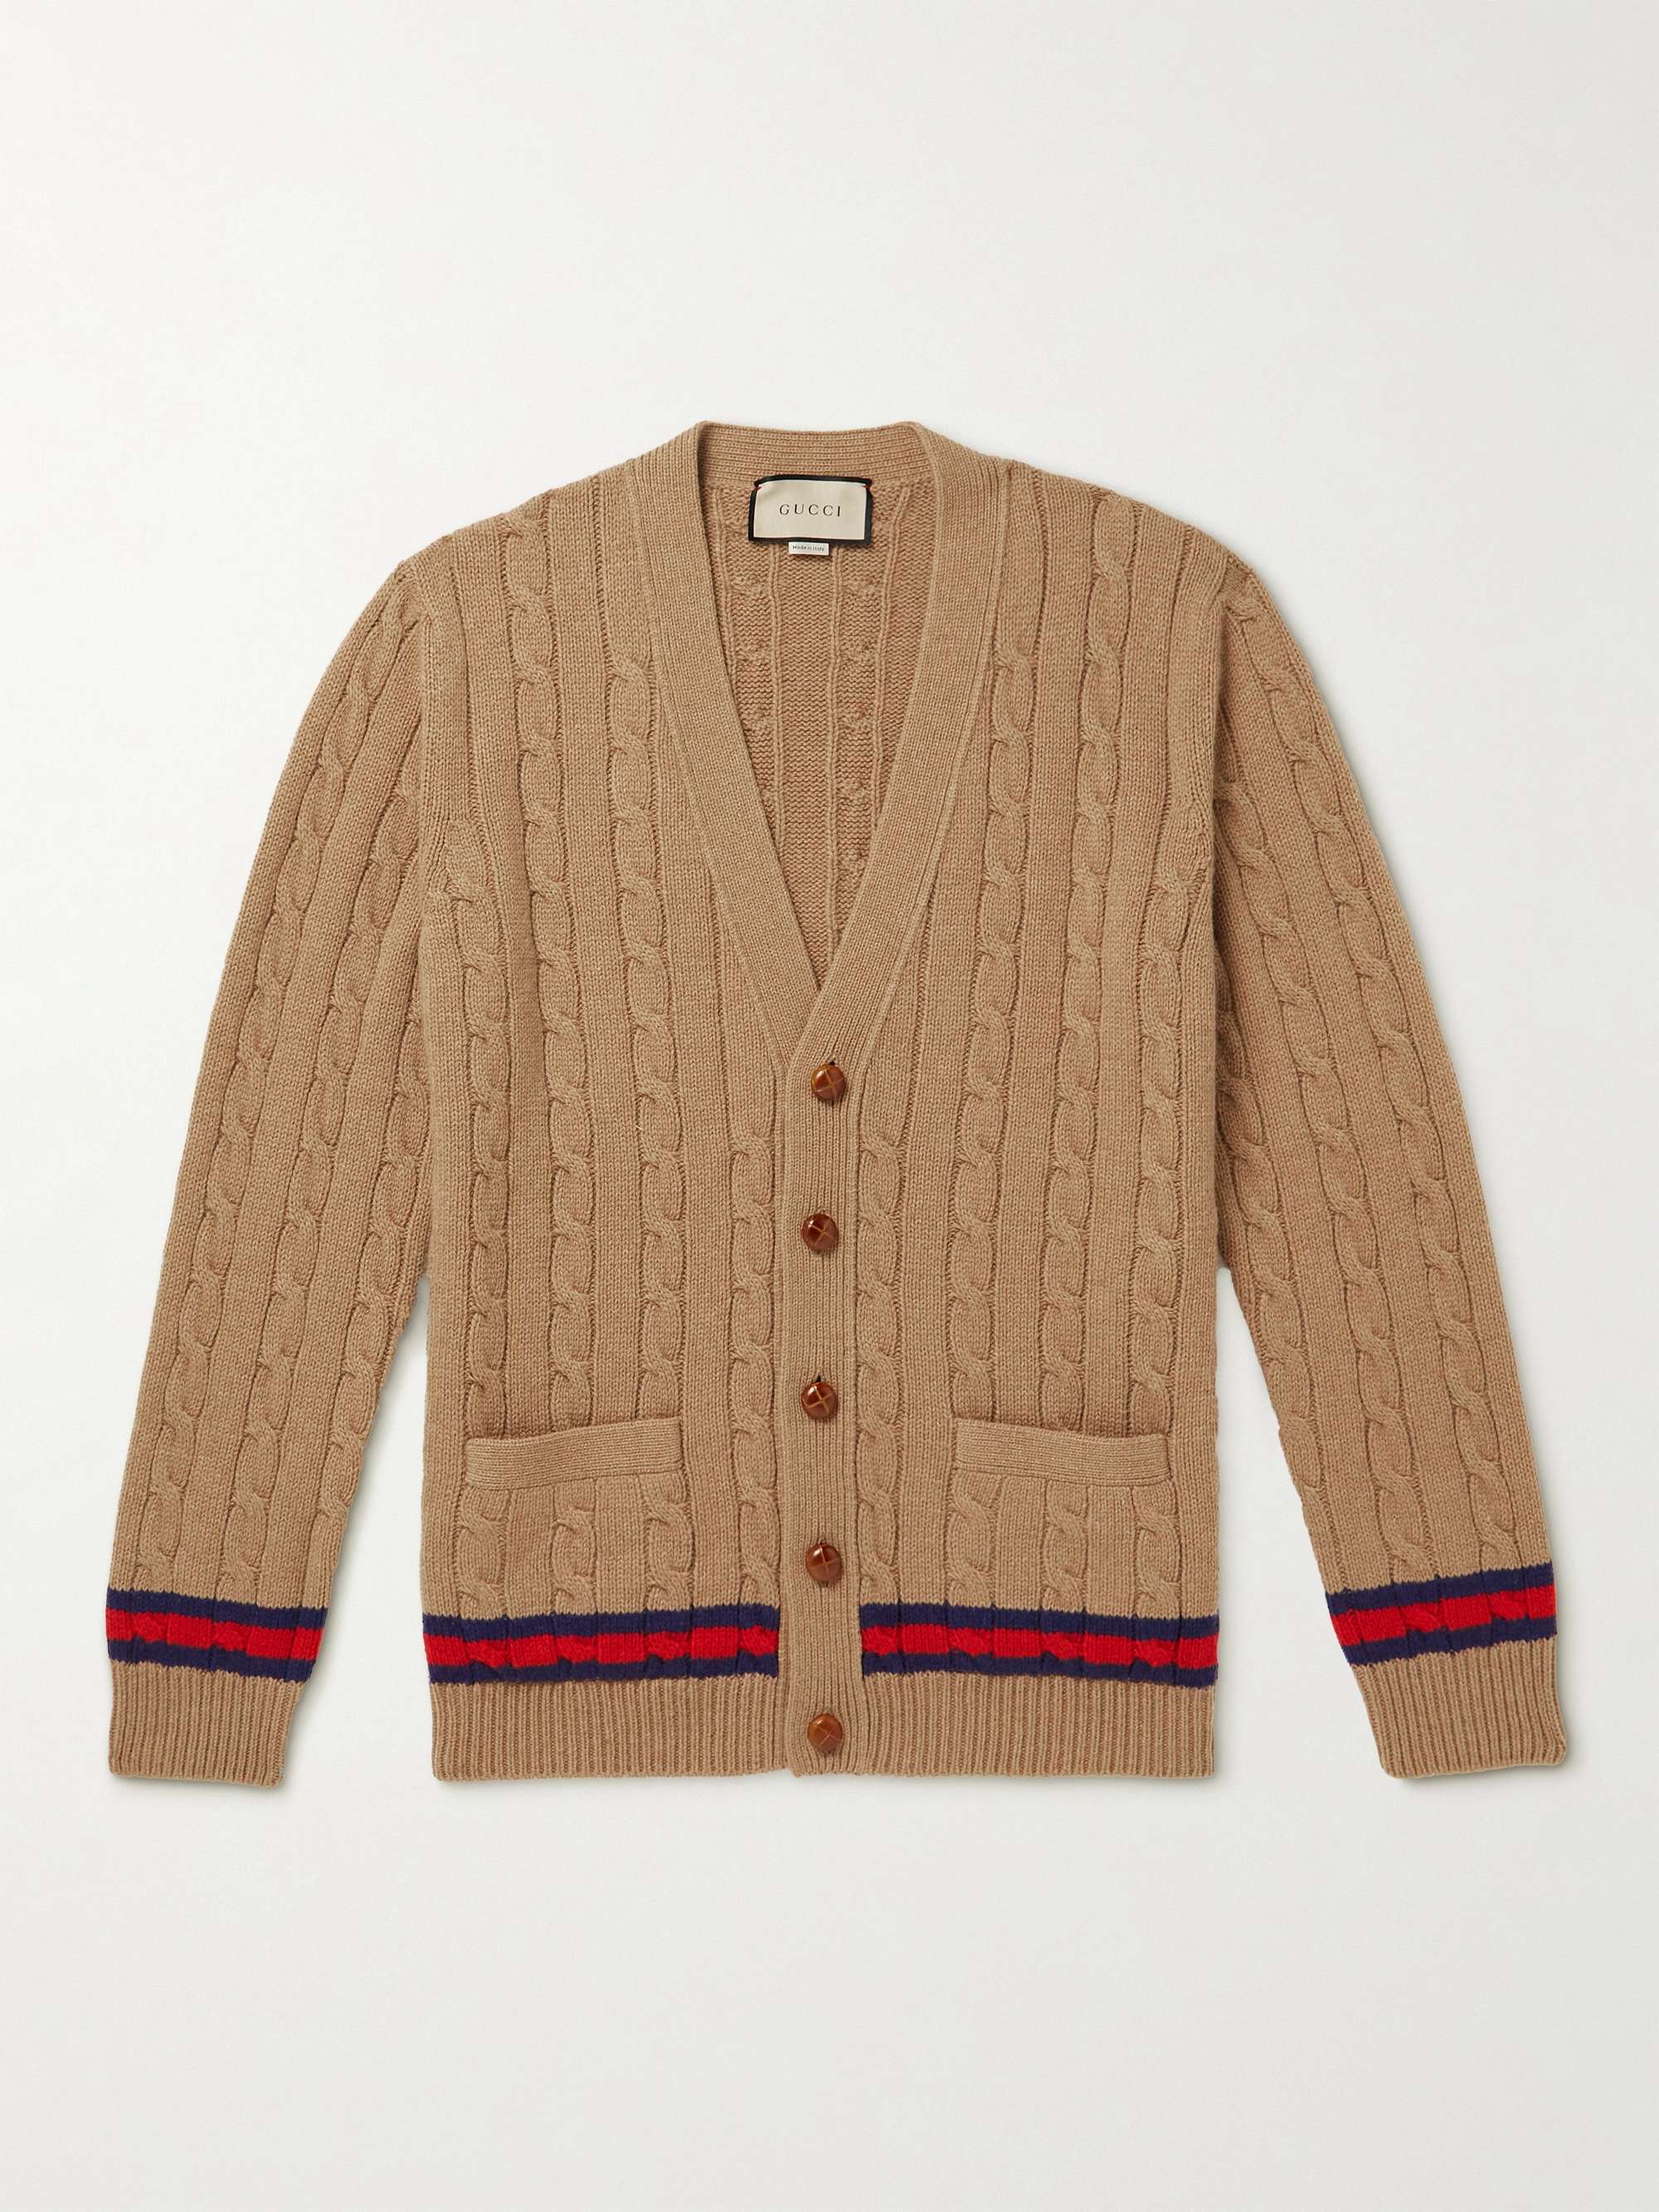 GUCCI Striped Cable-Knit Cashmere and Wool-Blend Cardigan | MR PORTER